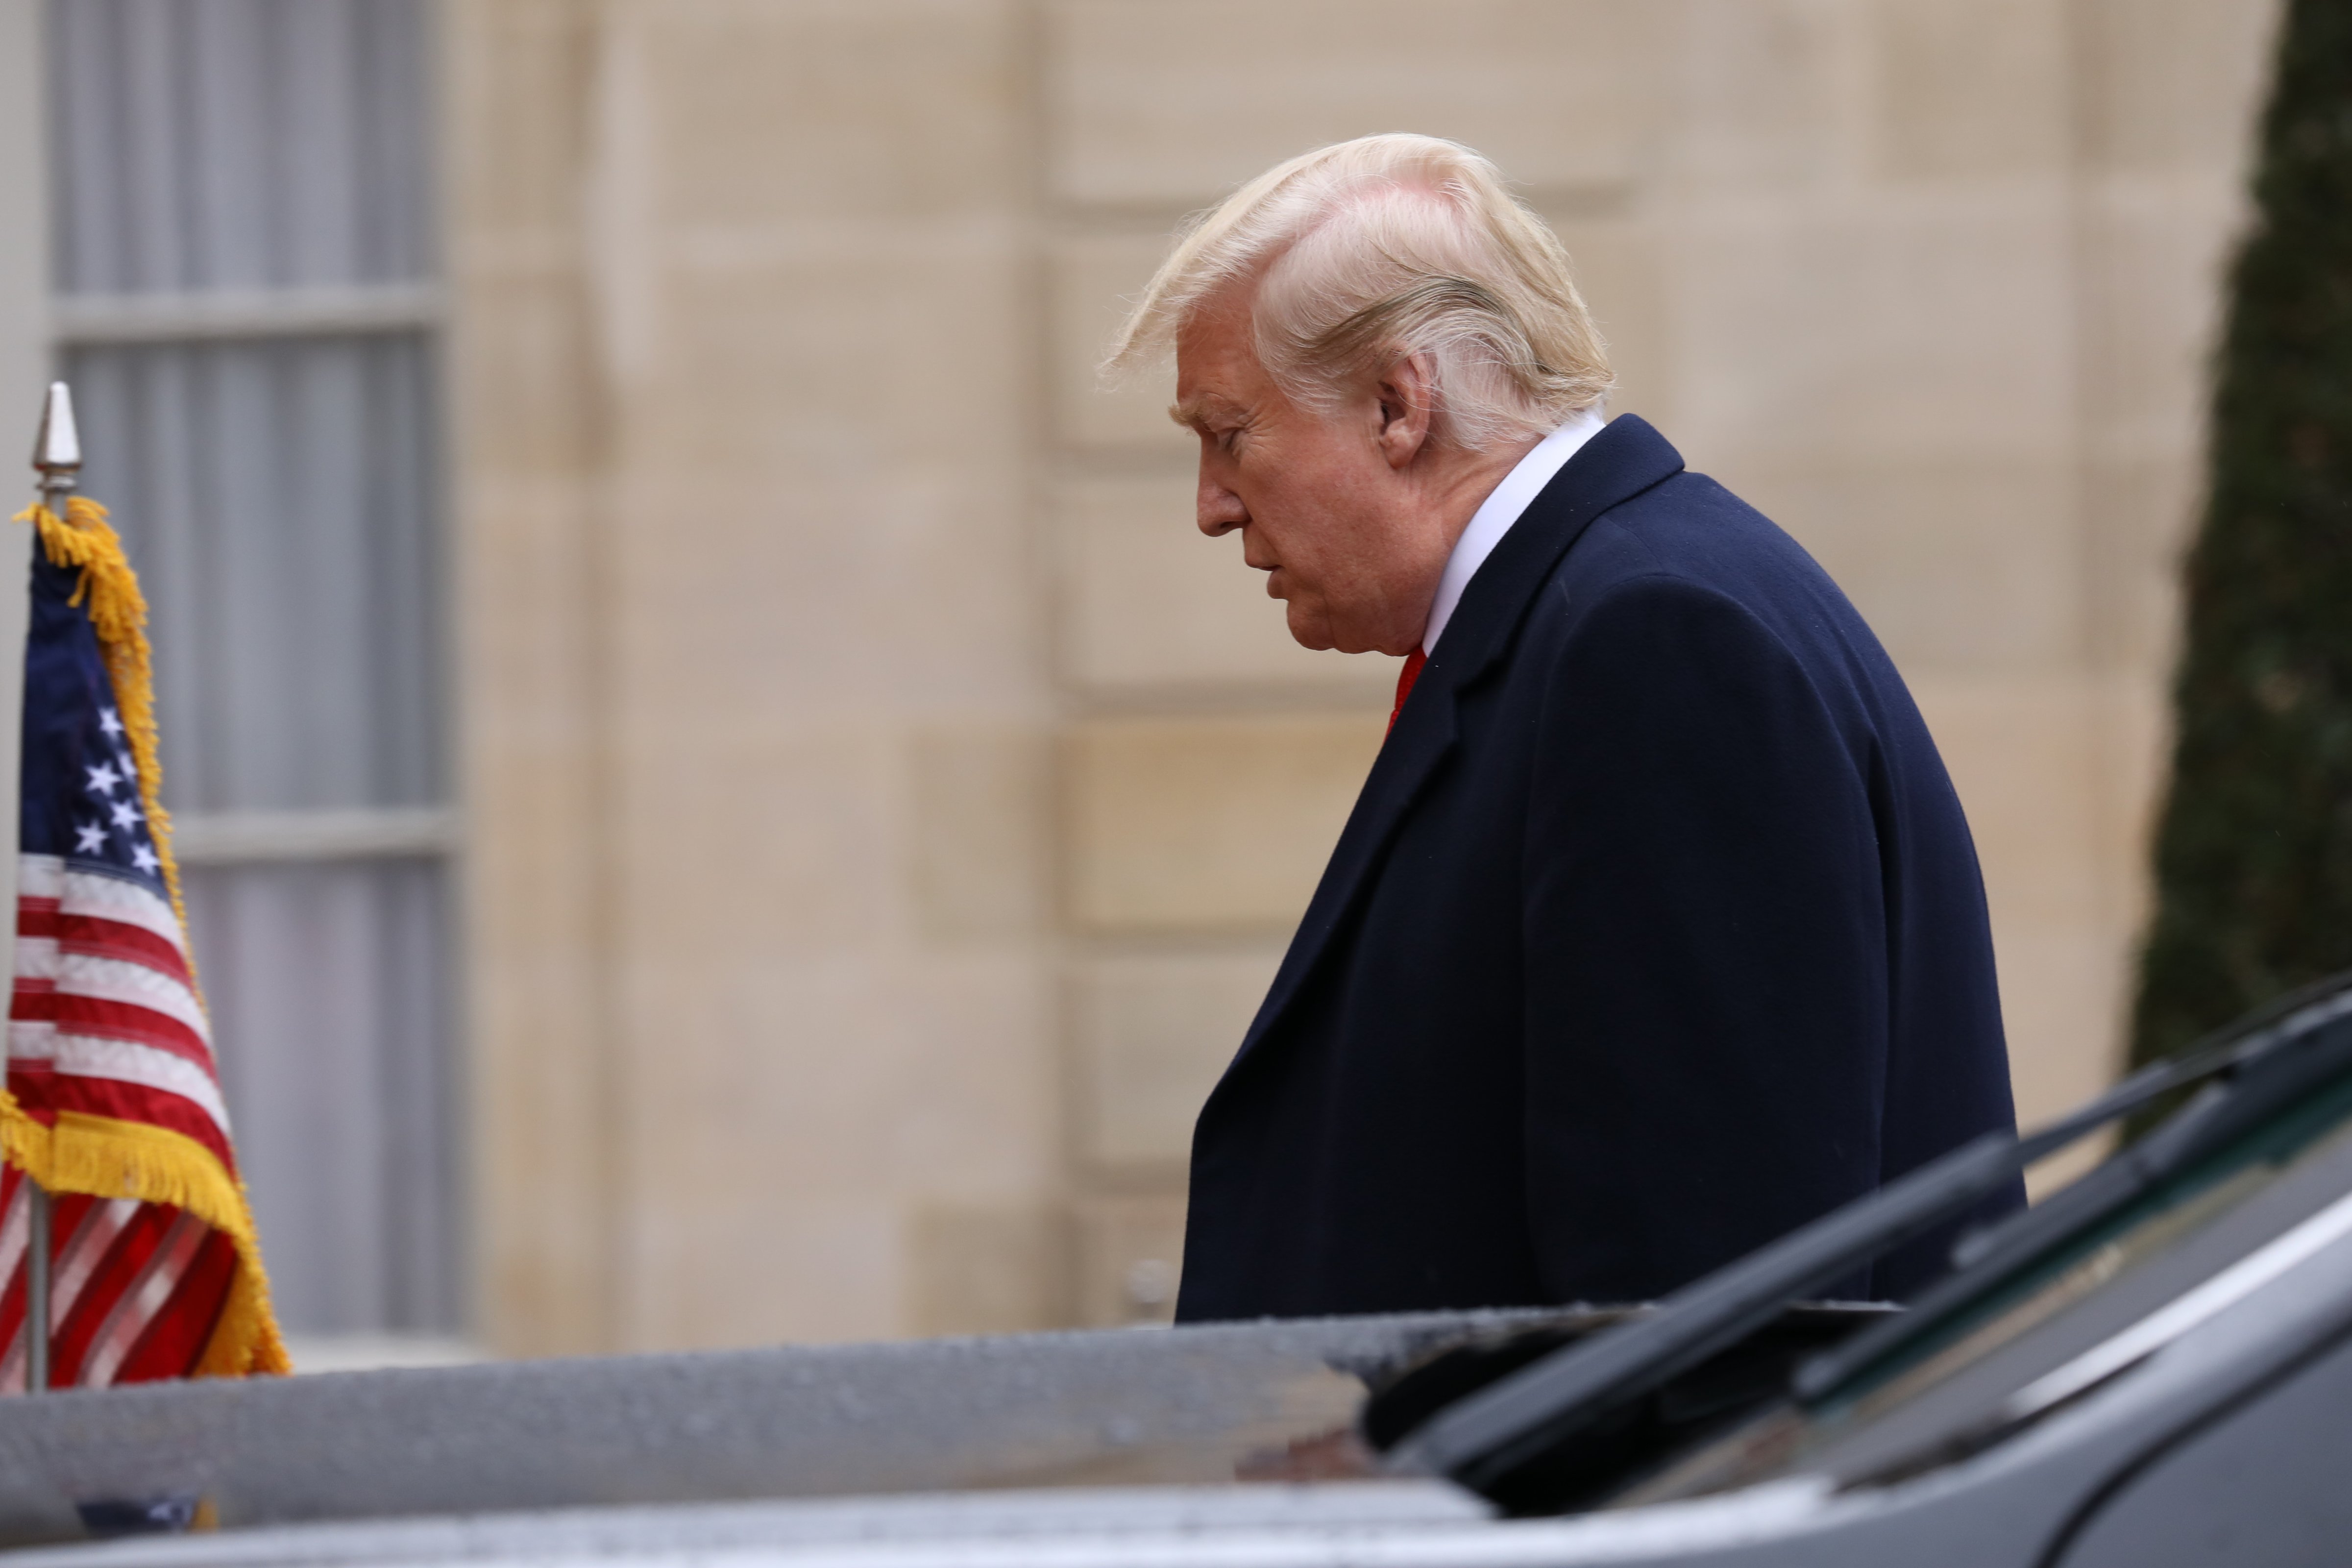 President of The United States of America Donald Trump arrives for the lunch after the commemoration of the 100th anniversary of the end of WWI at Elysee Palace on November 11, 2018 in Paris, France. (Antoine Gyori - Corbis&mdash;Corbis via Getty Images)